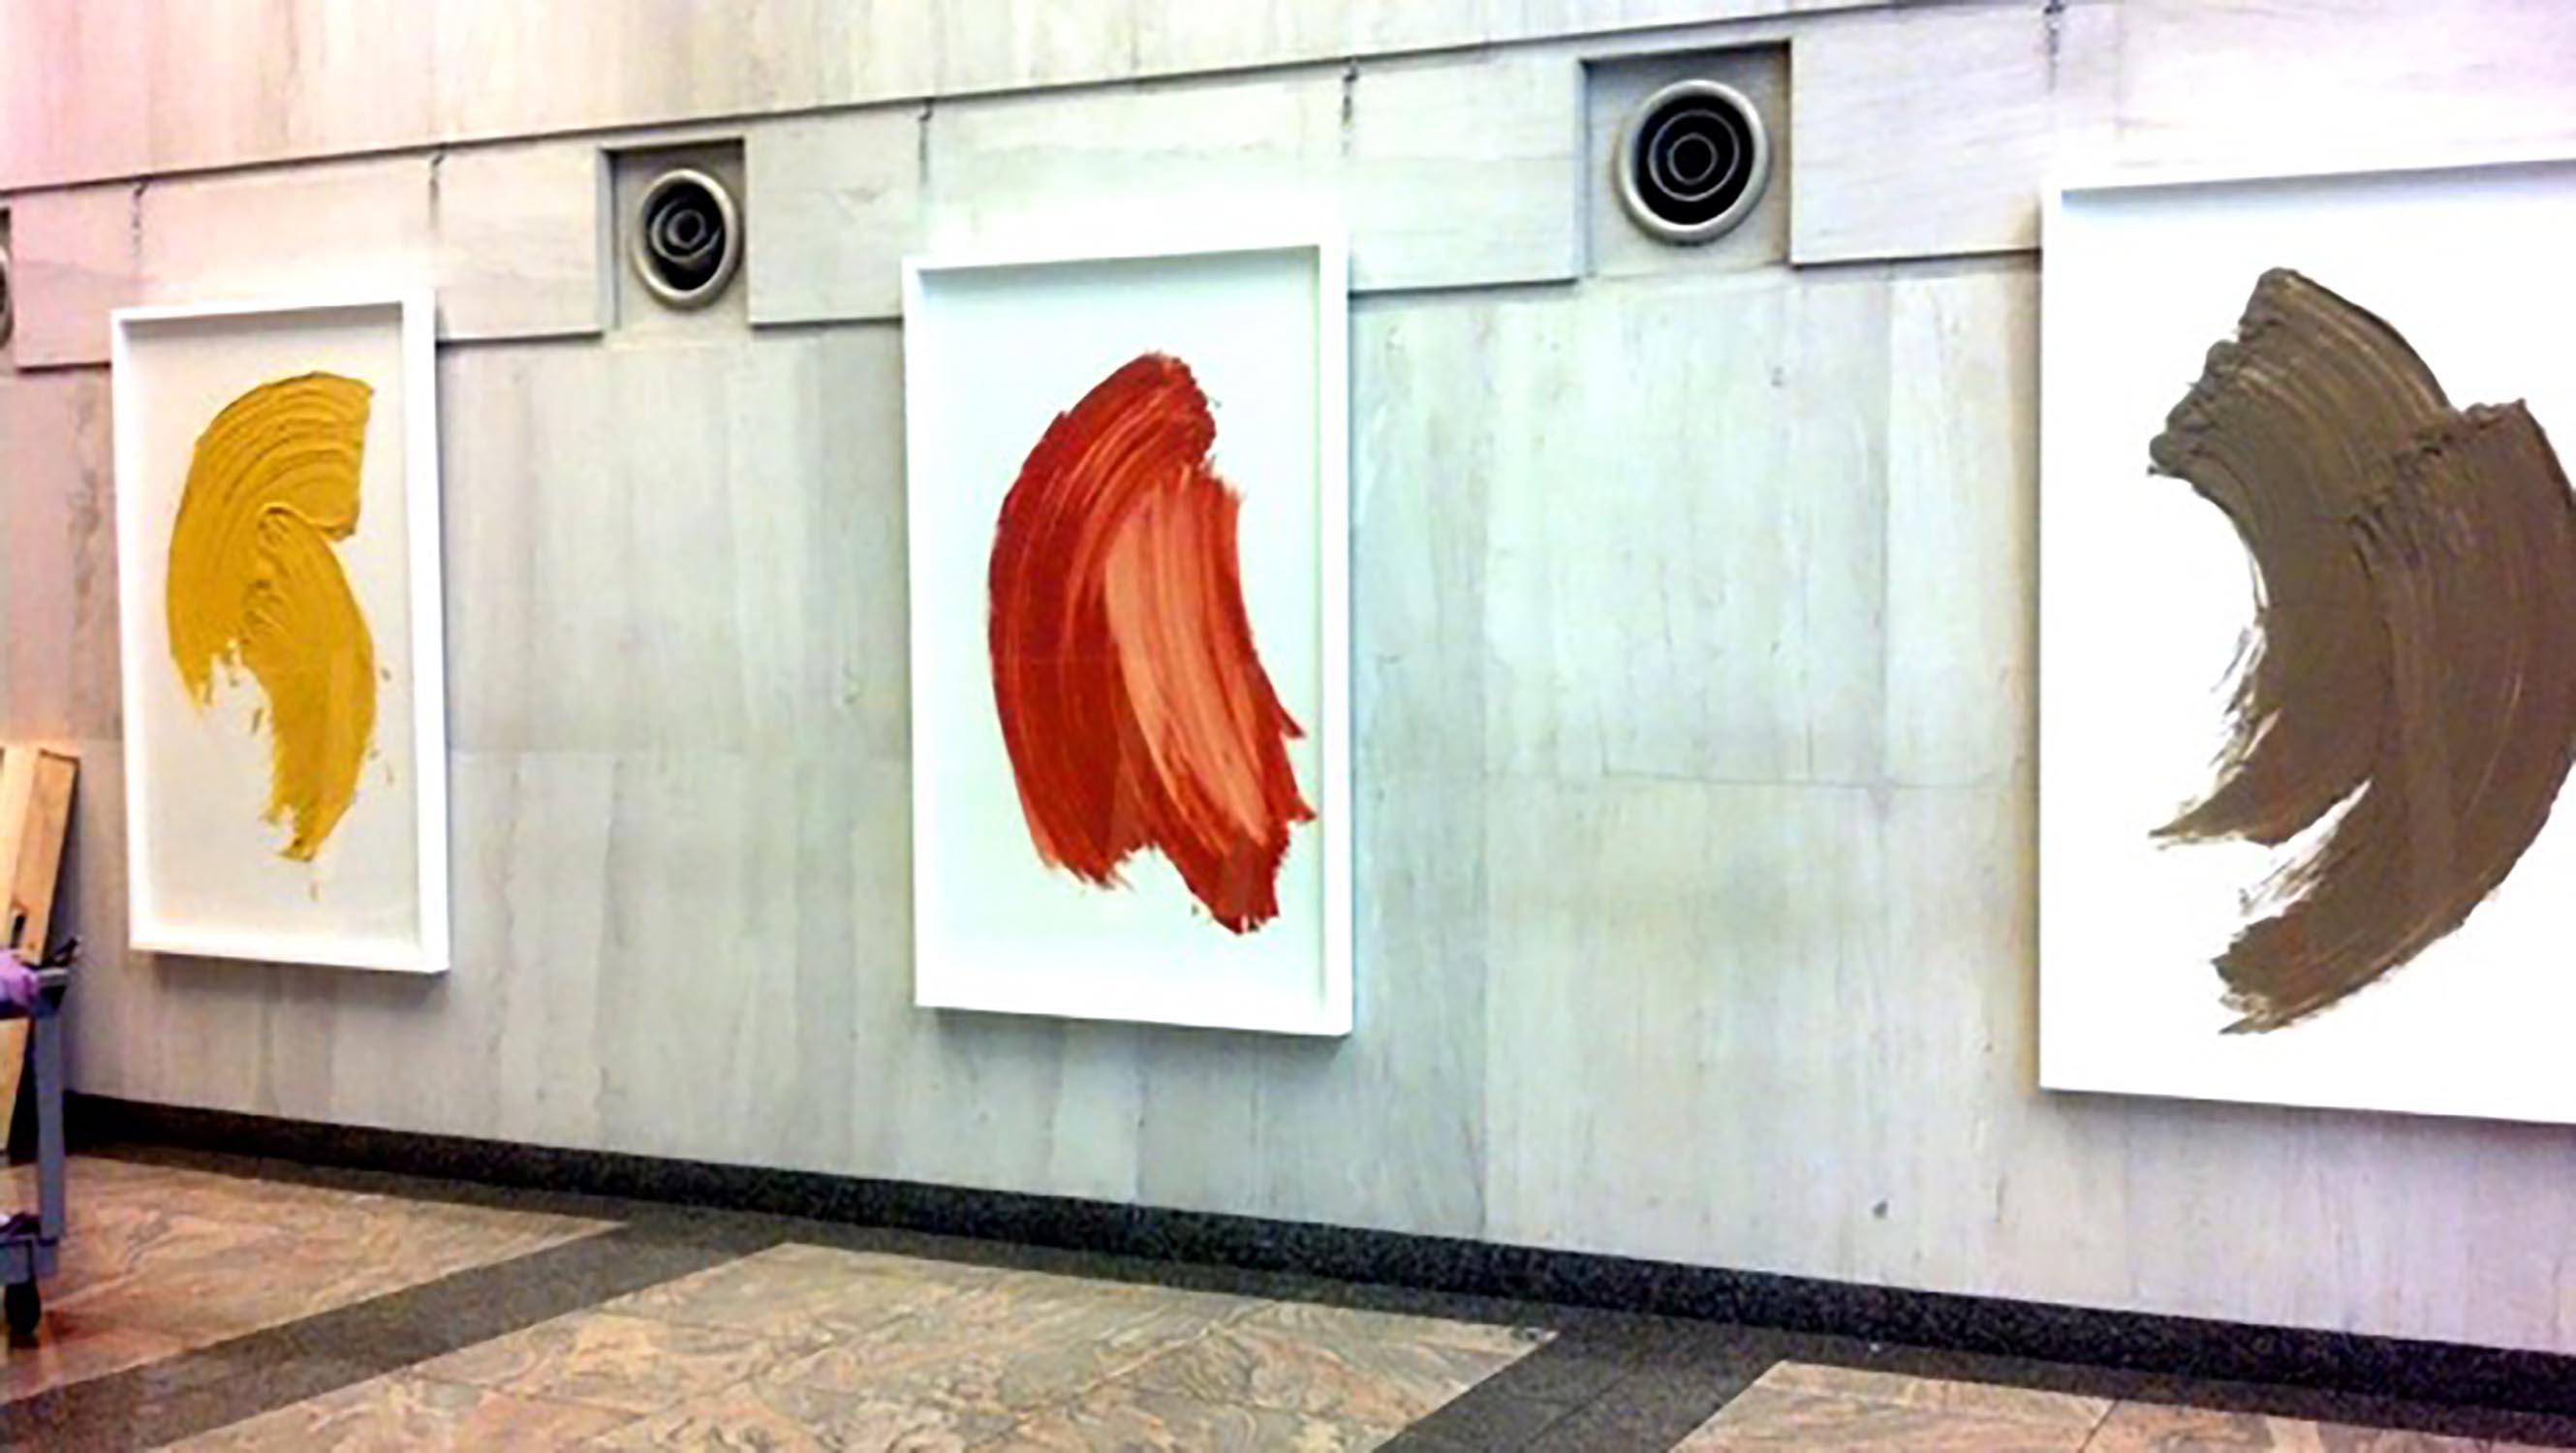 A13 - Painting by Donald Martiny